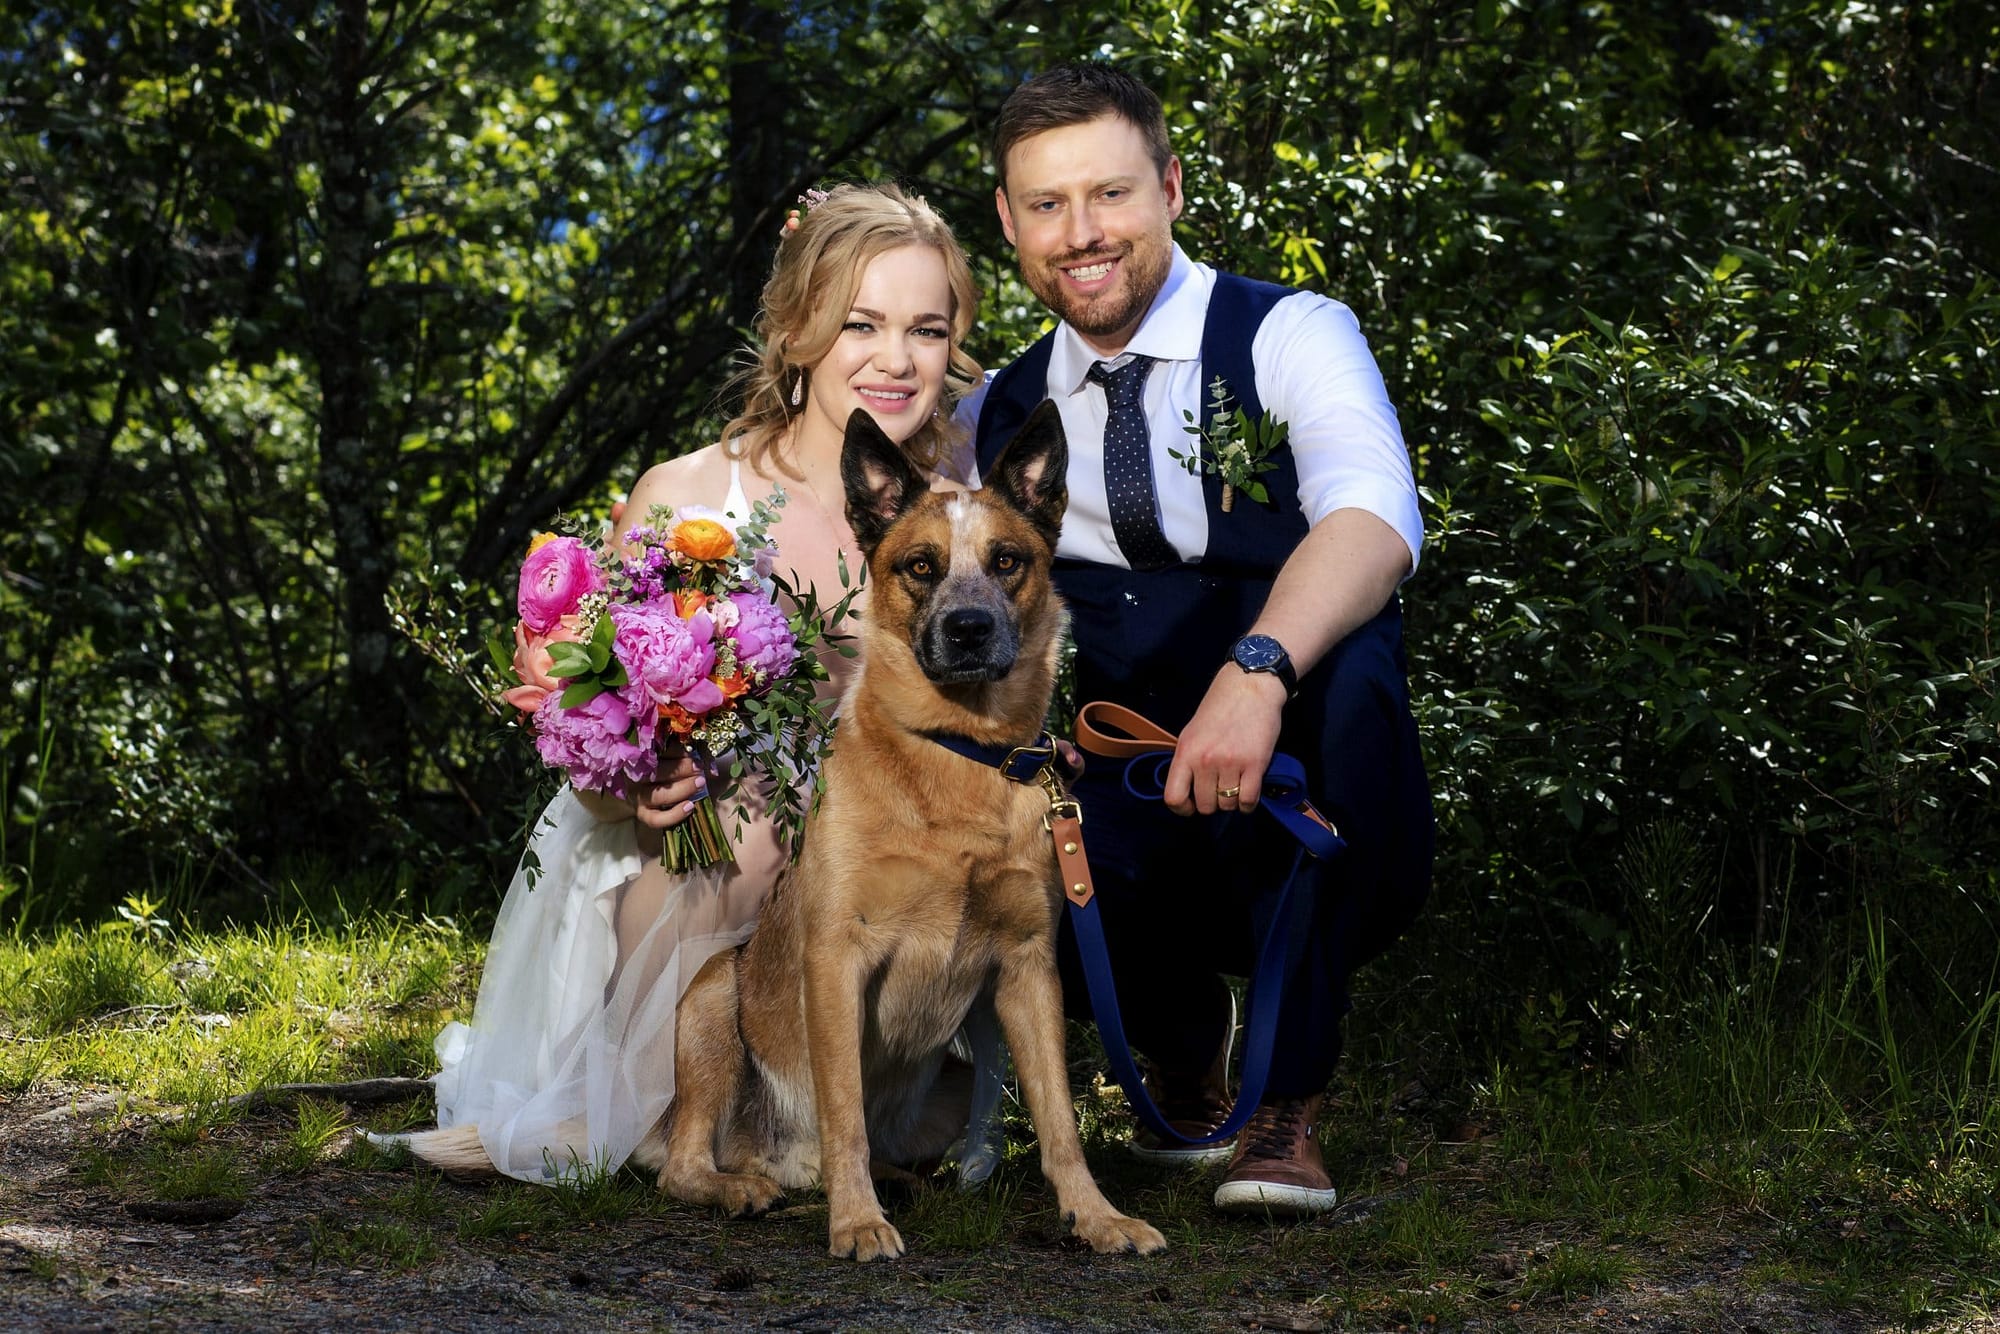 wedding couple crouching down and posing with dog in the centre- getting married in Jasper